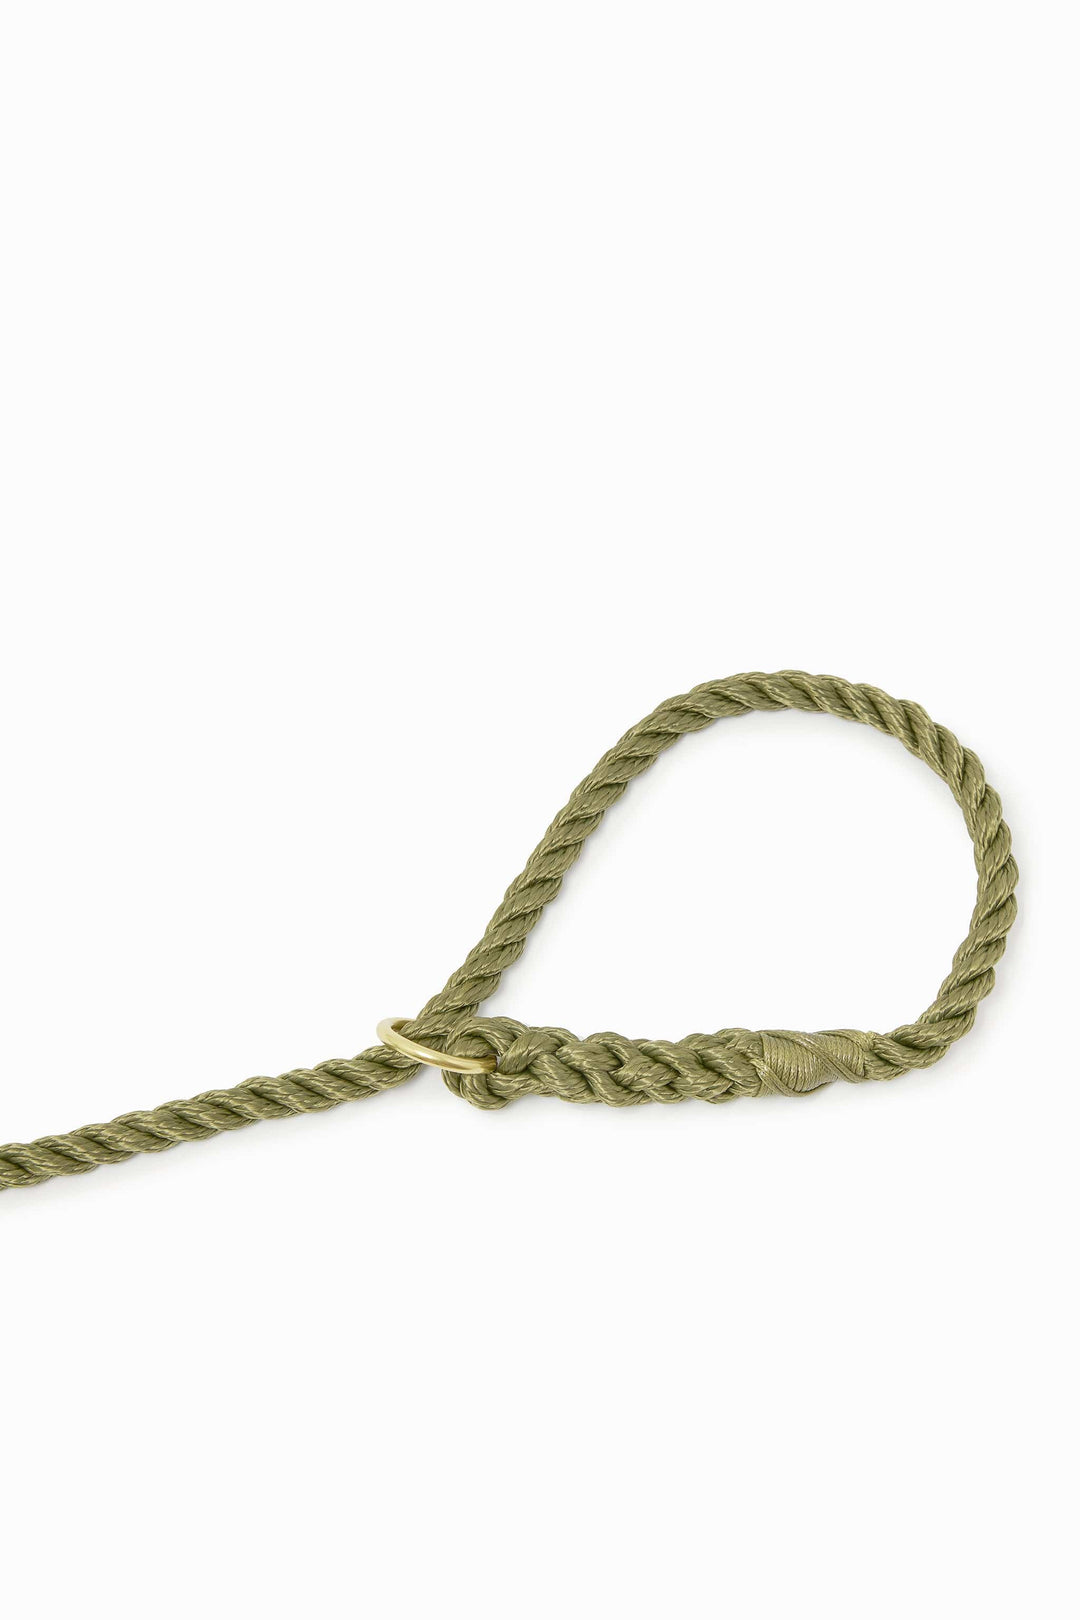 Rope dog slip lead for gundogs and training in woodland green, 5ft long